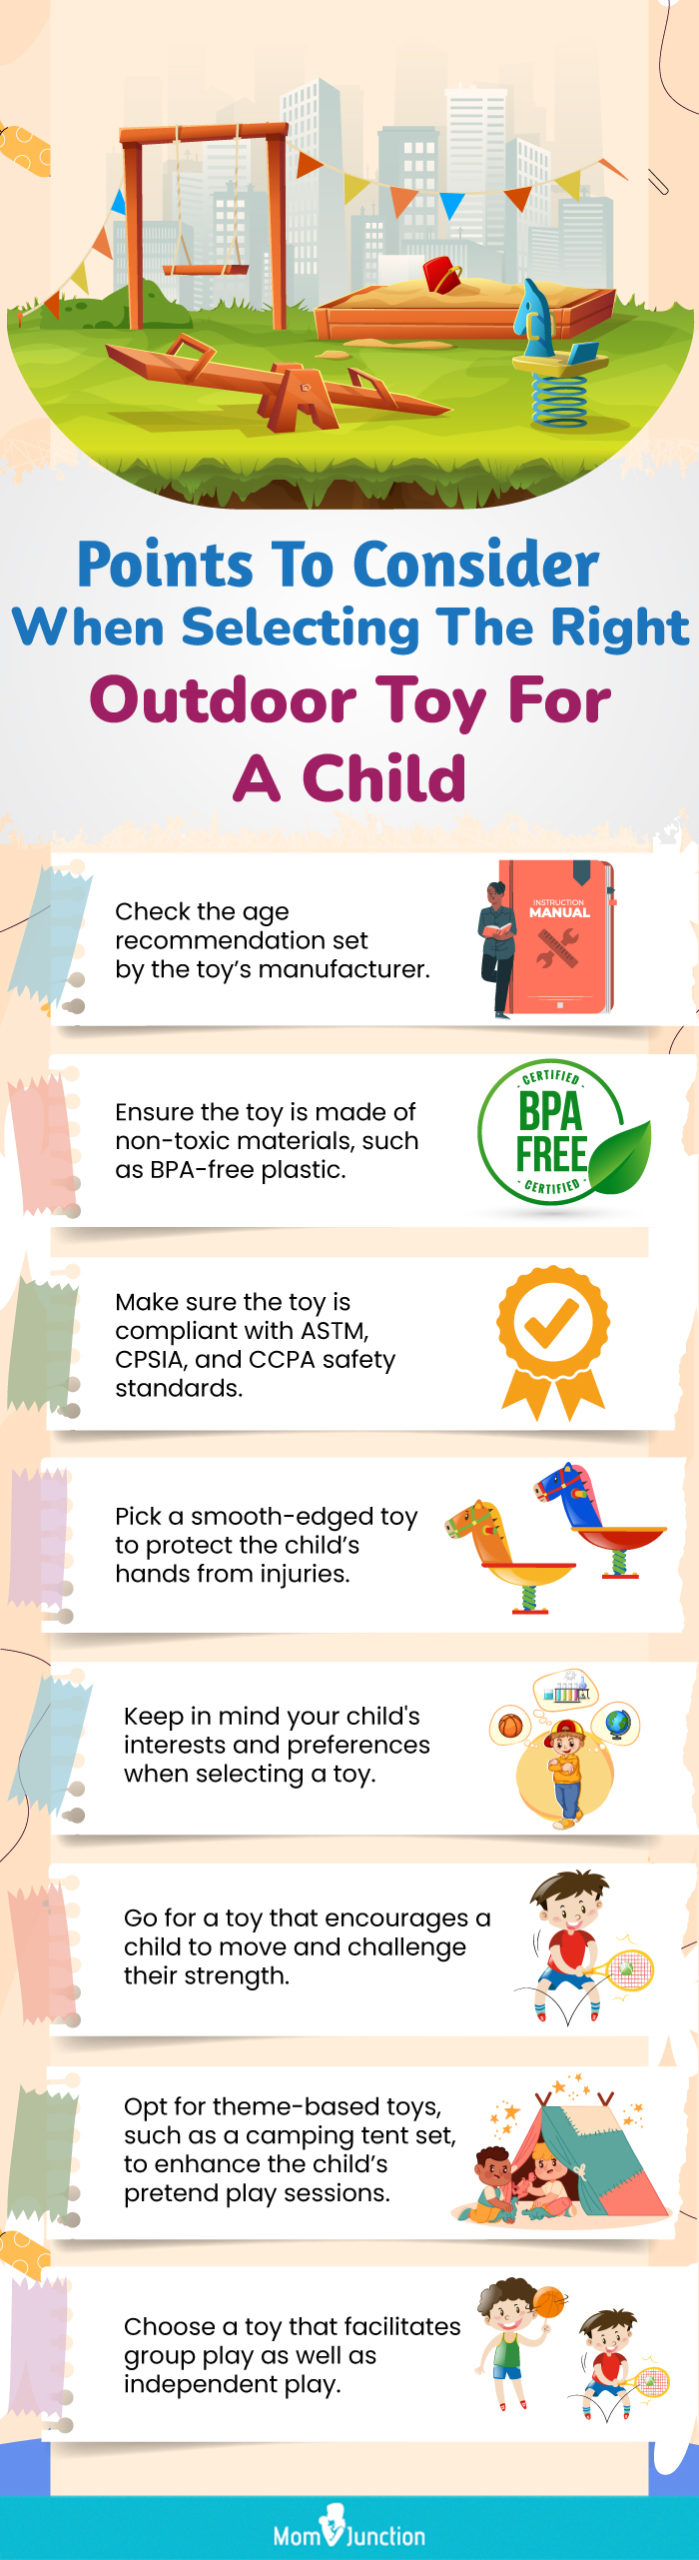 Points To Consider When Selecting The Right Outdoor Toy For A Child (infographic)